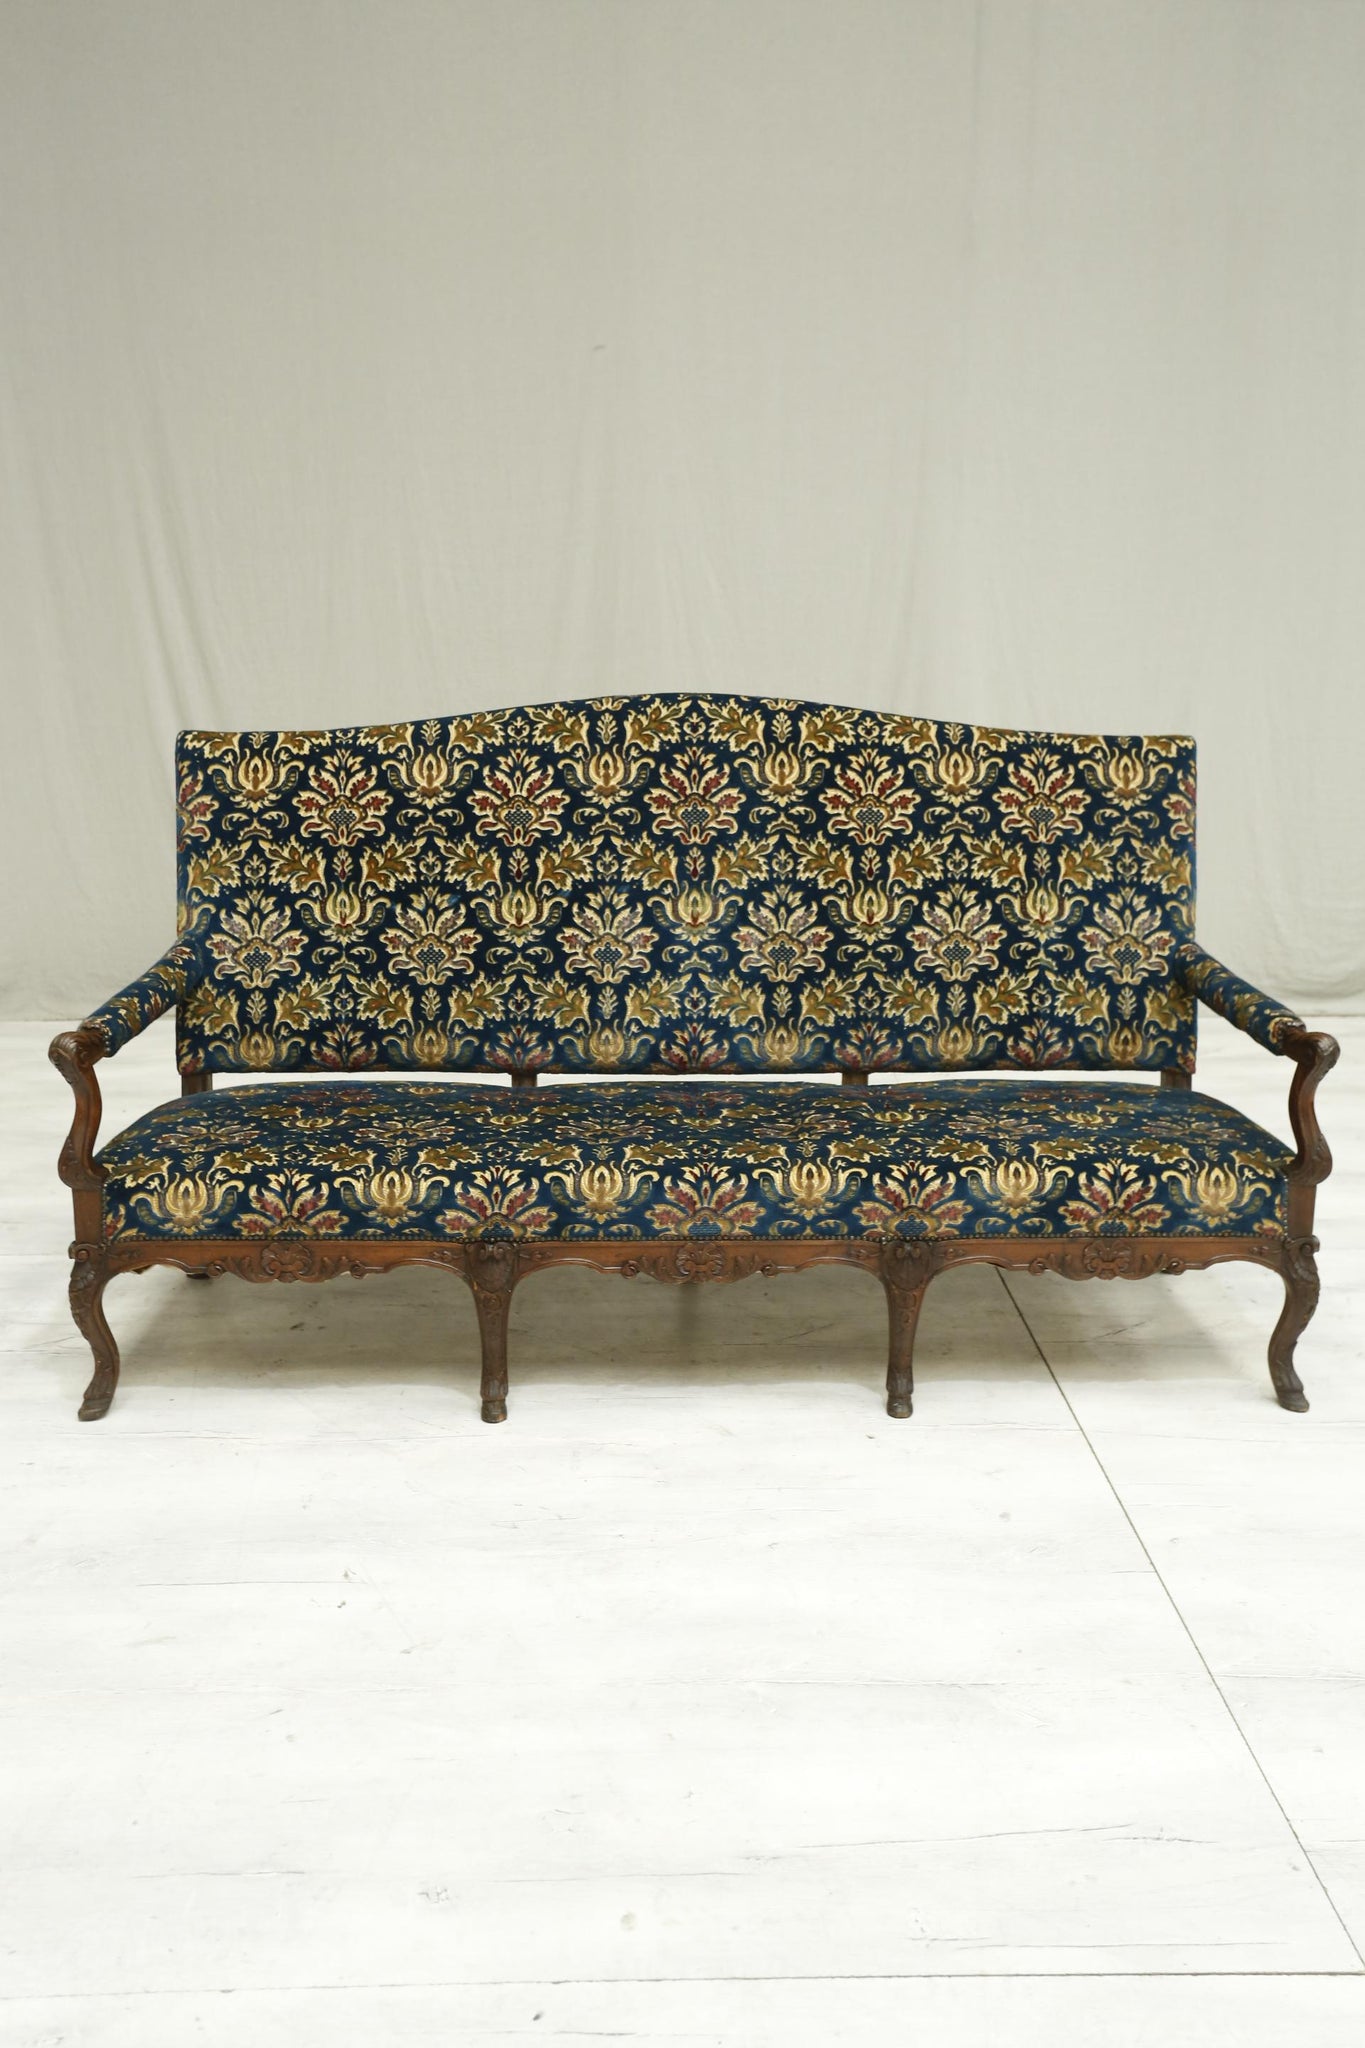 19th century French settee with carved frame